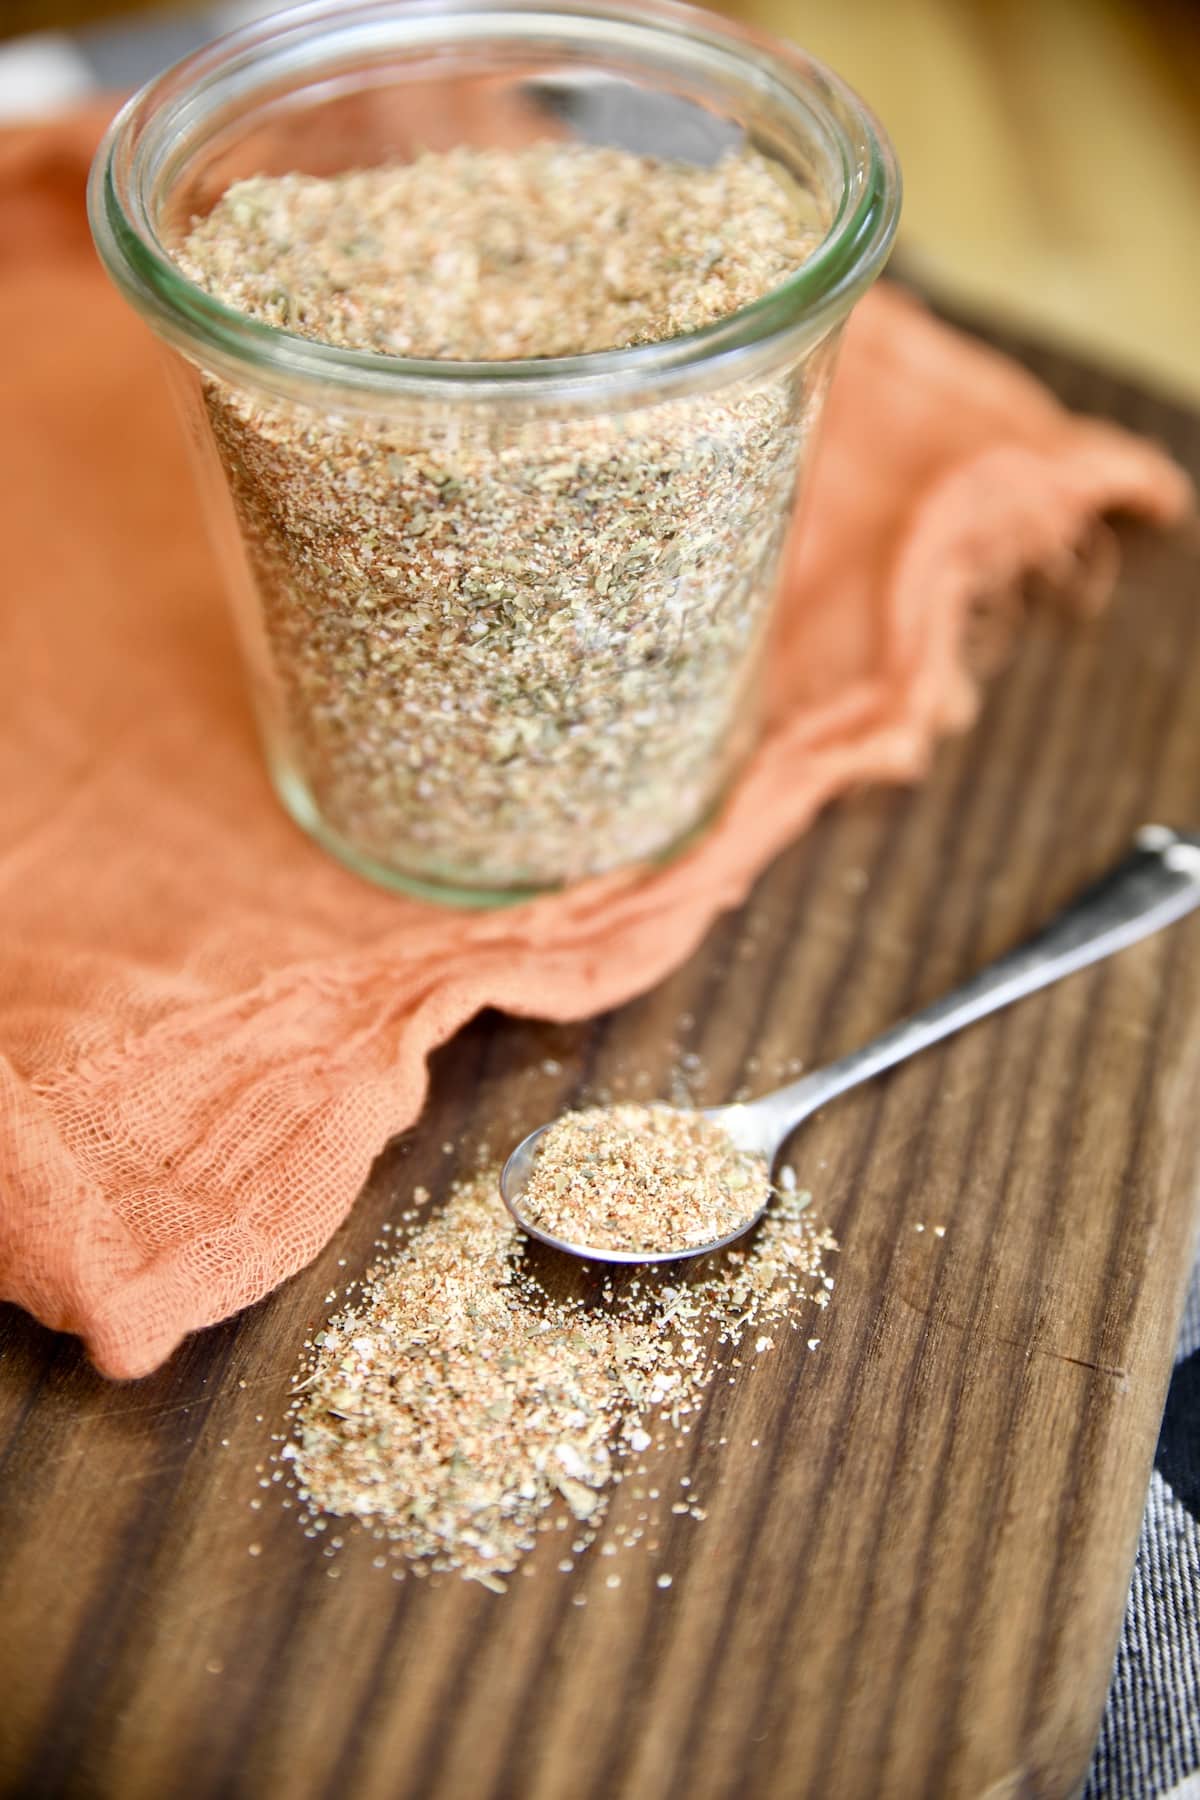 Jar of spice rub, spoonful spilled onto board.